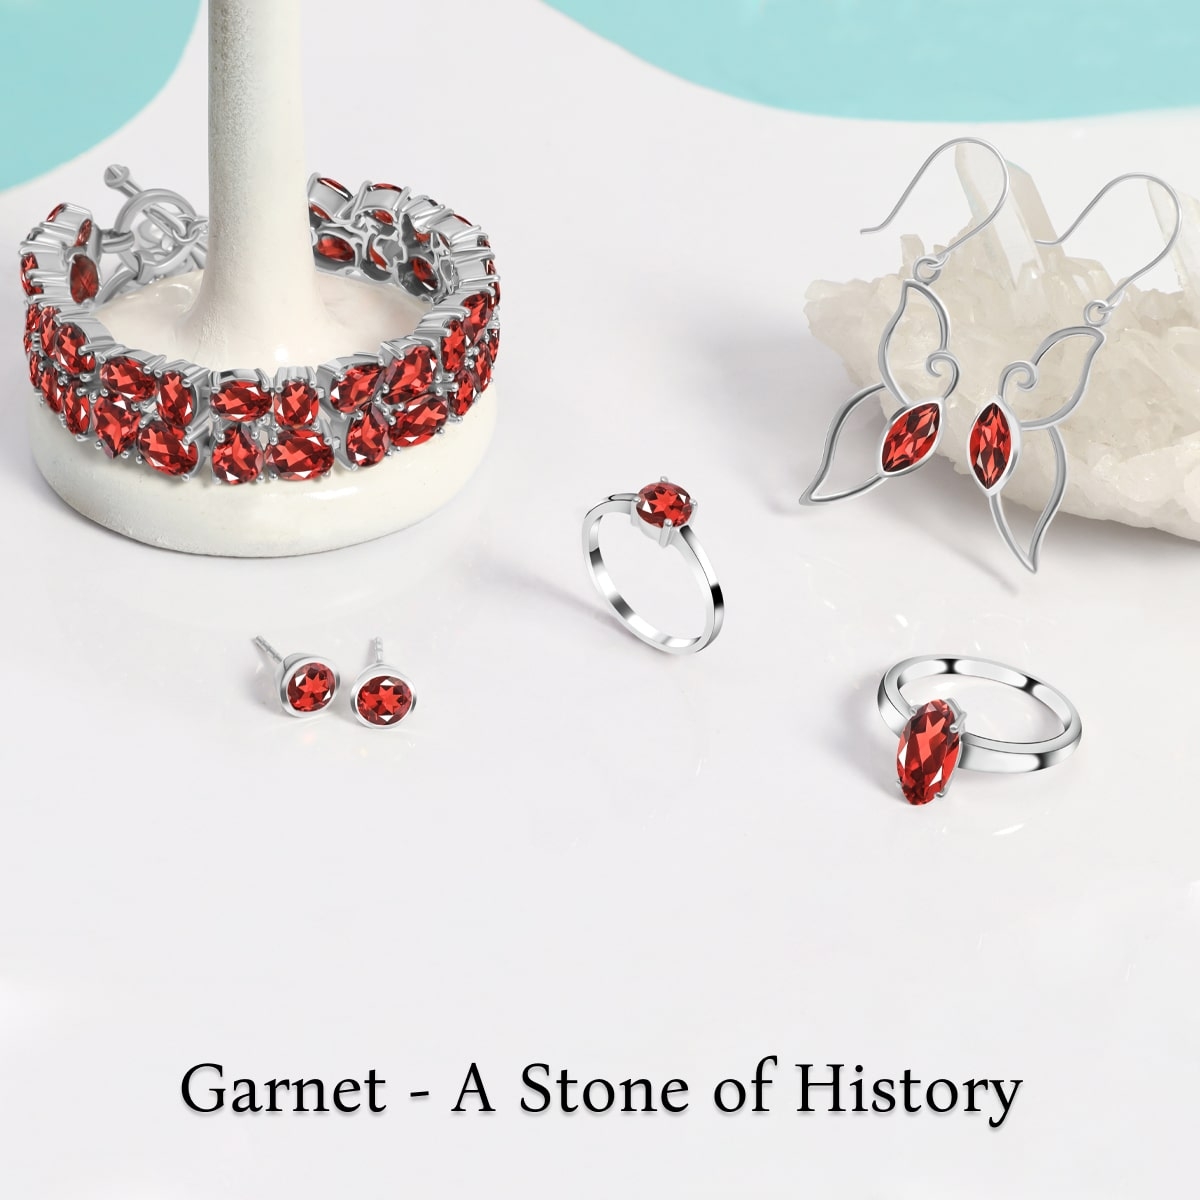 Historical Connections of Garnet